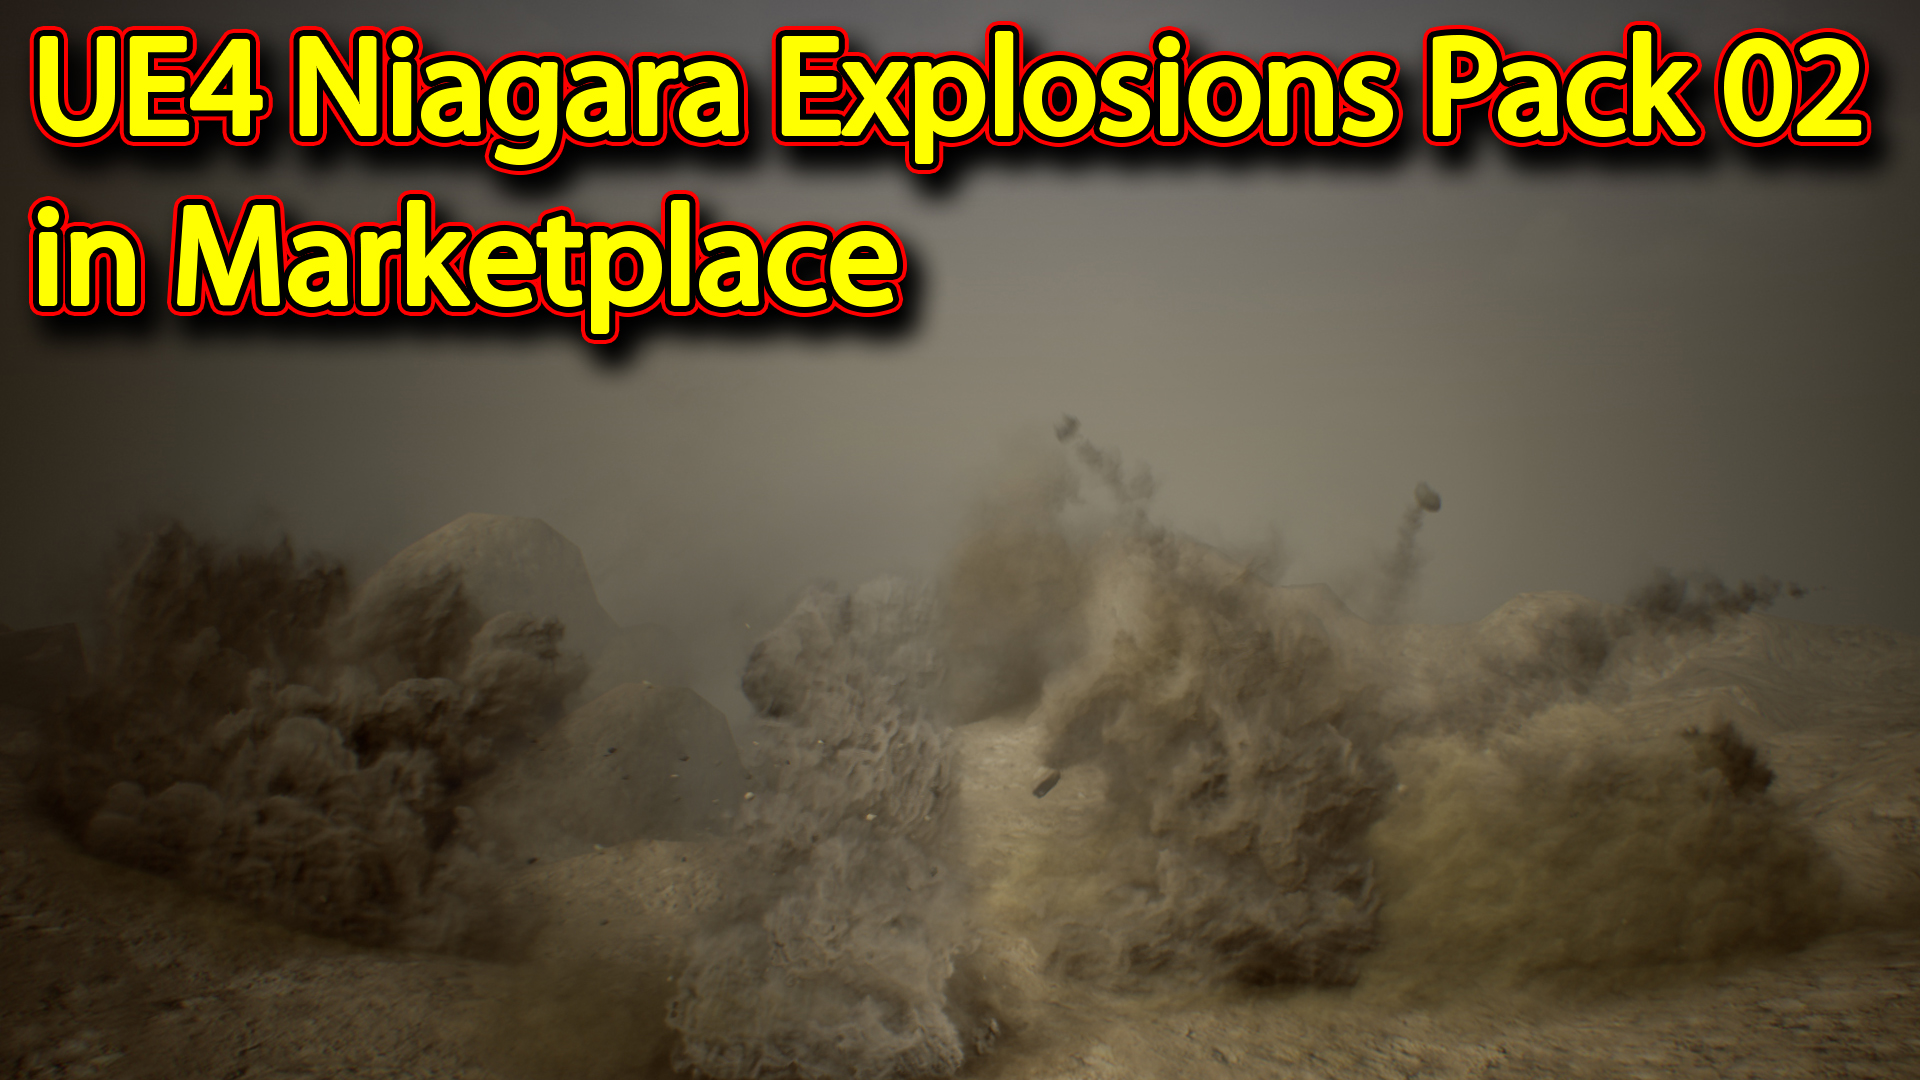 UE4 Niagara Explosions Pack 02 in Marketplace